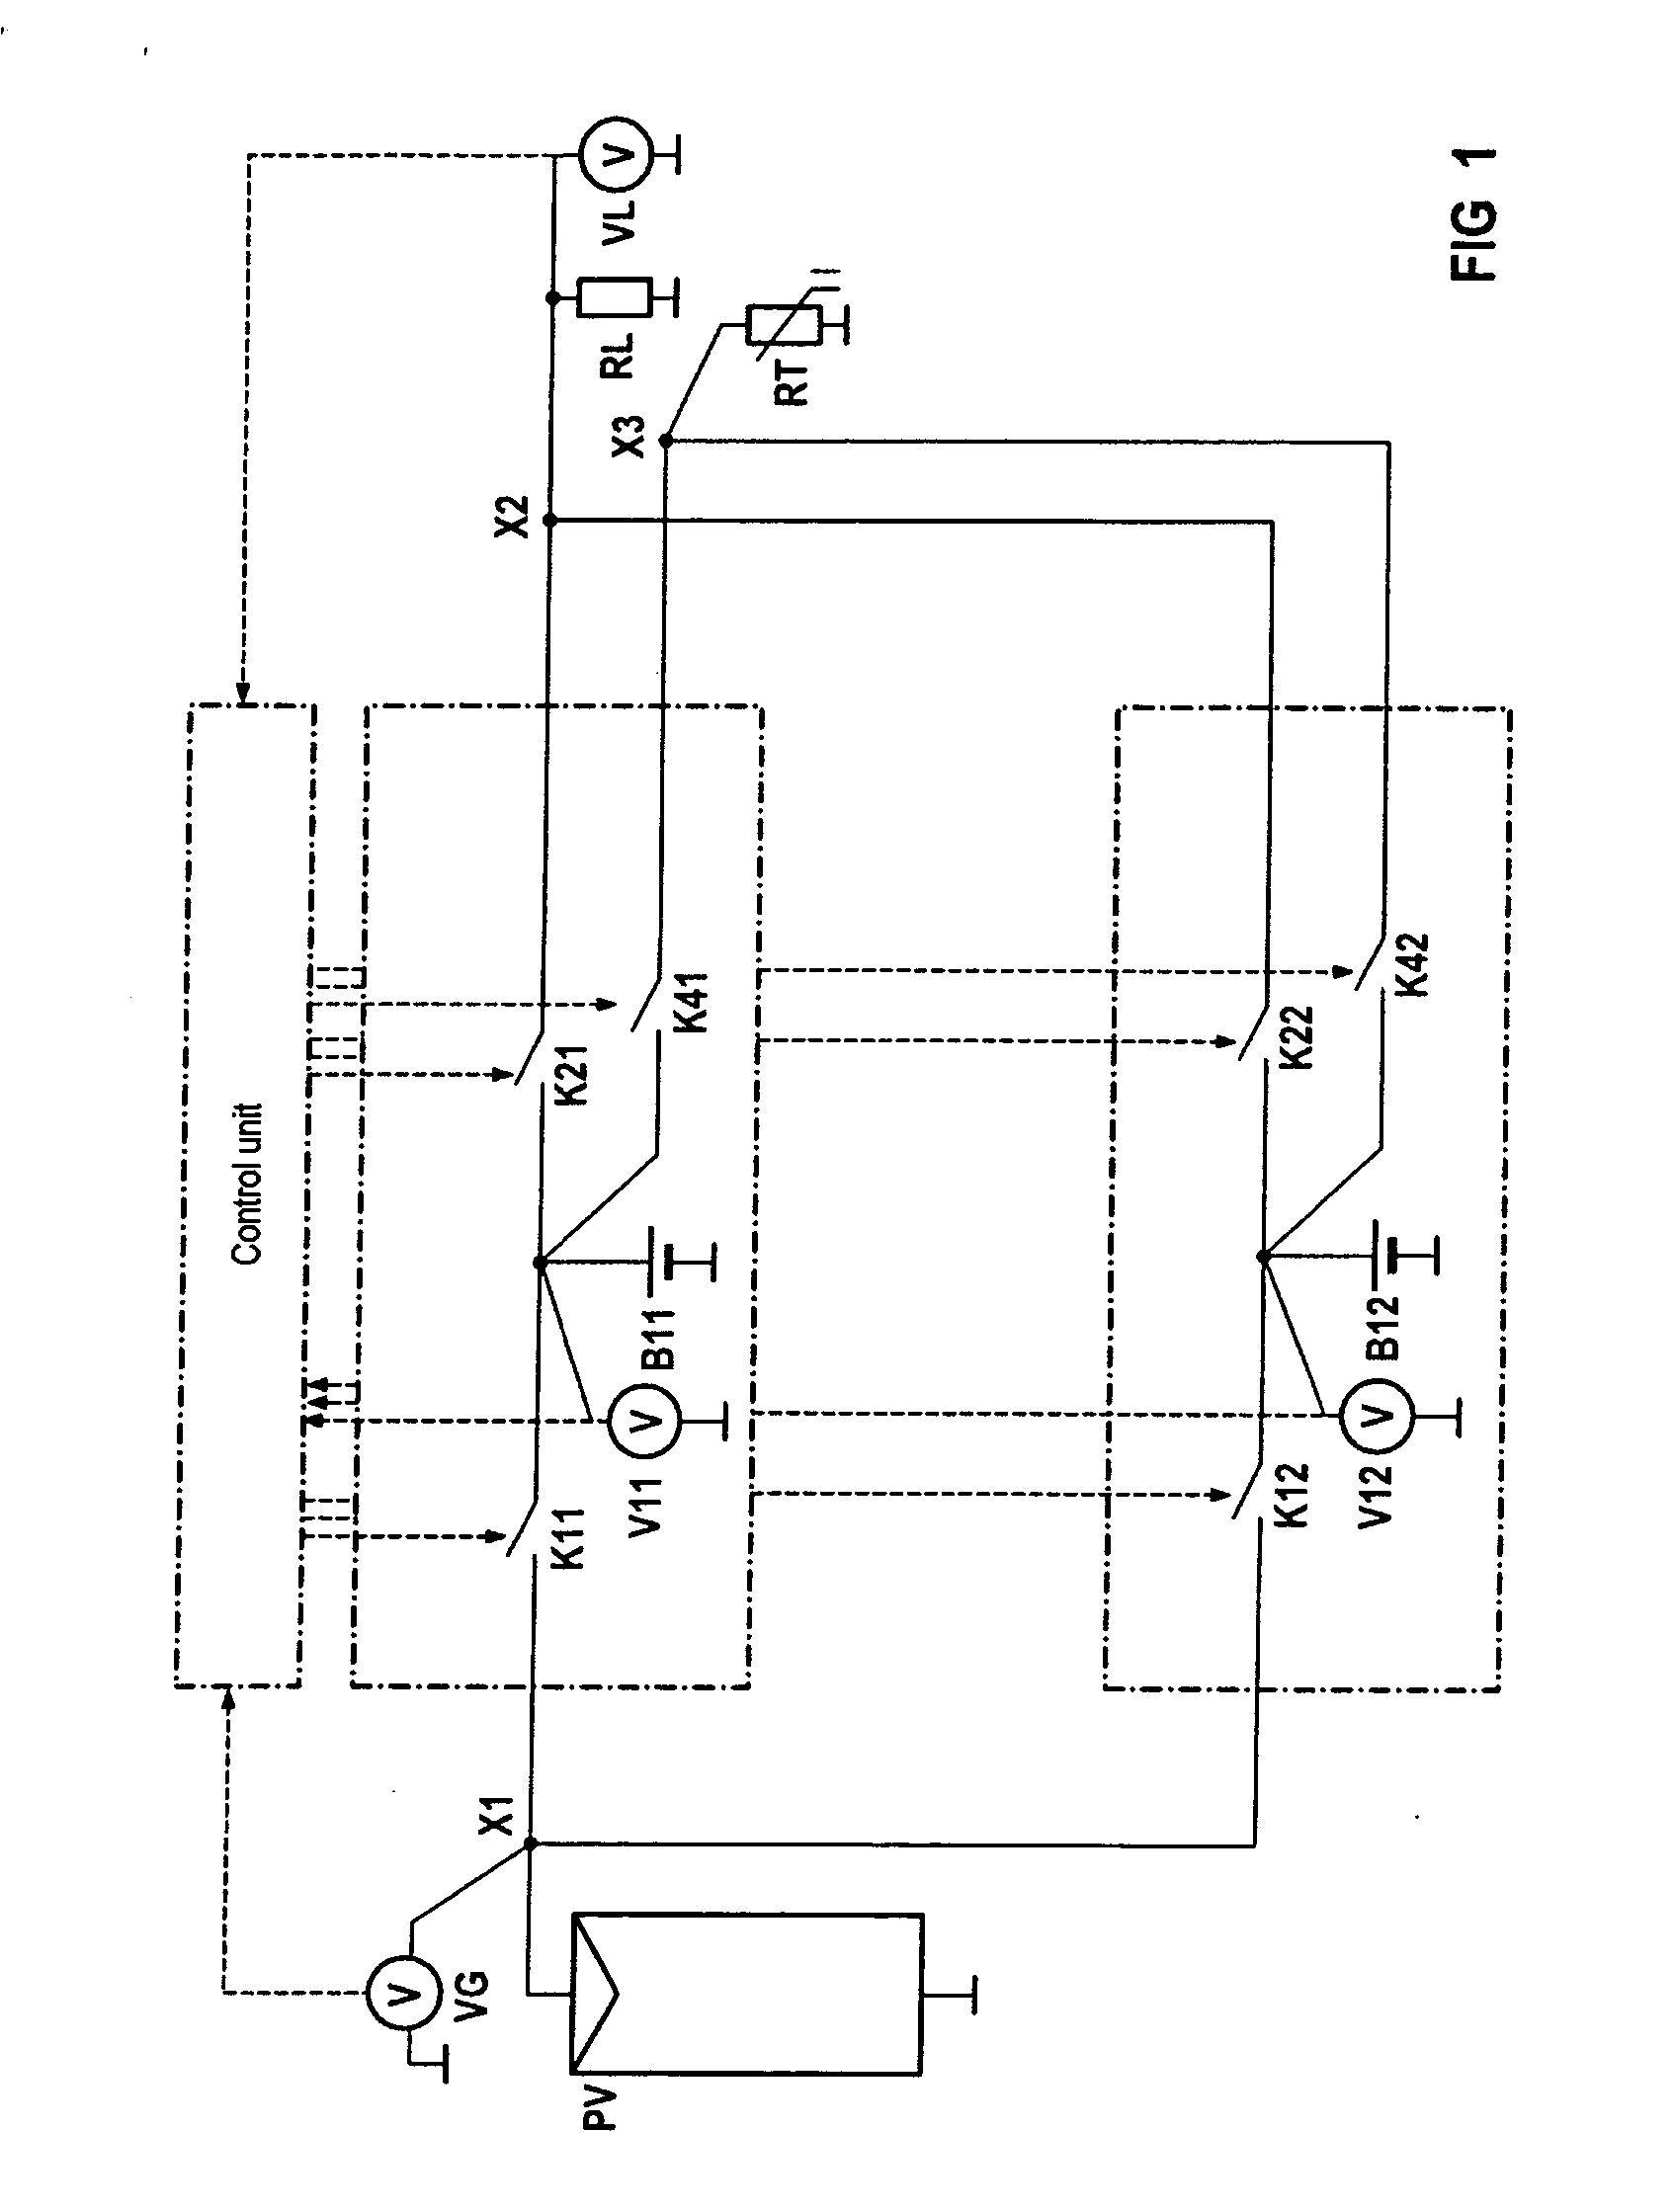 Method for assessment of the state of batteries in battery-supported power supply systems